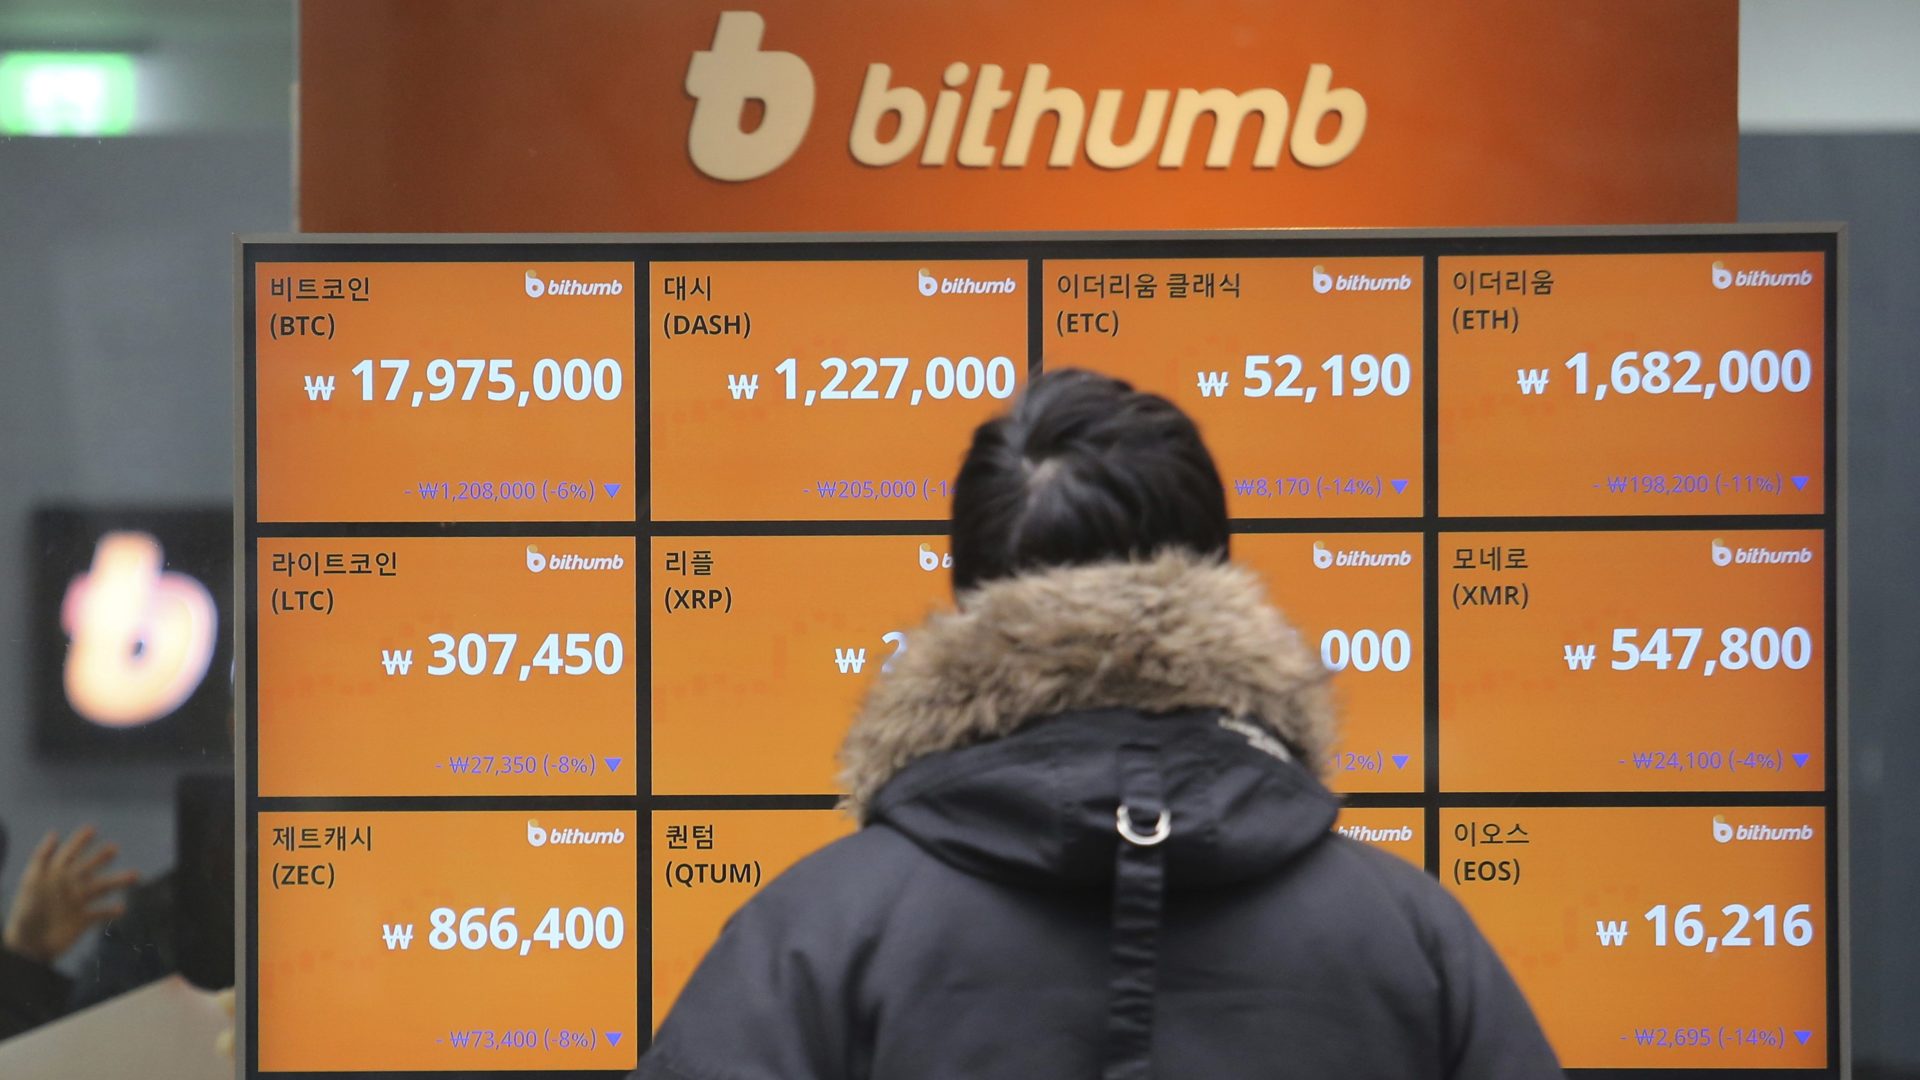  user south bithumb registration cryptocurrency reopens platform 